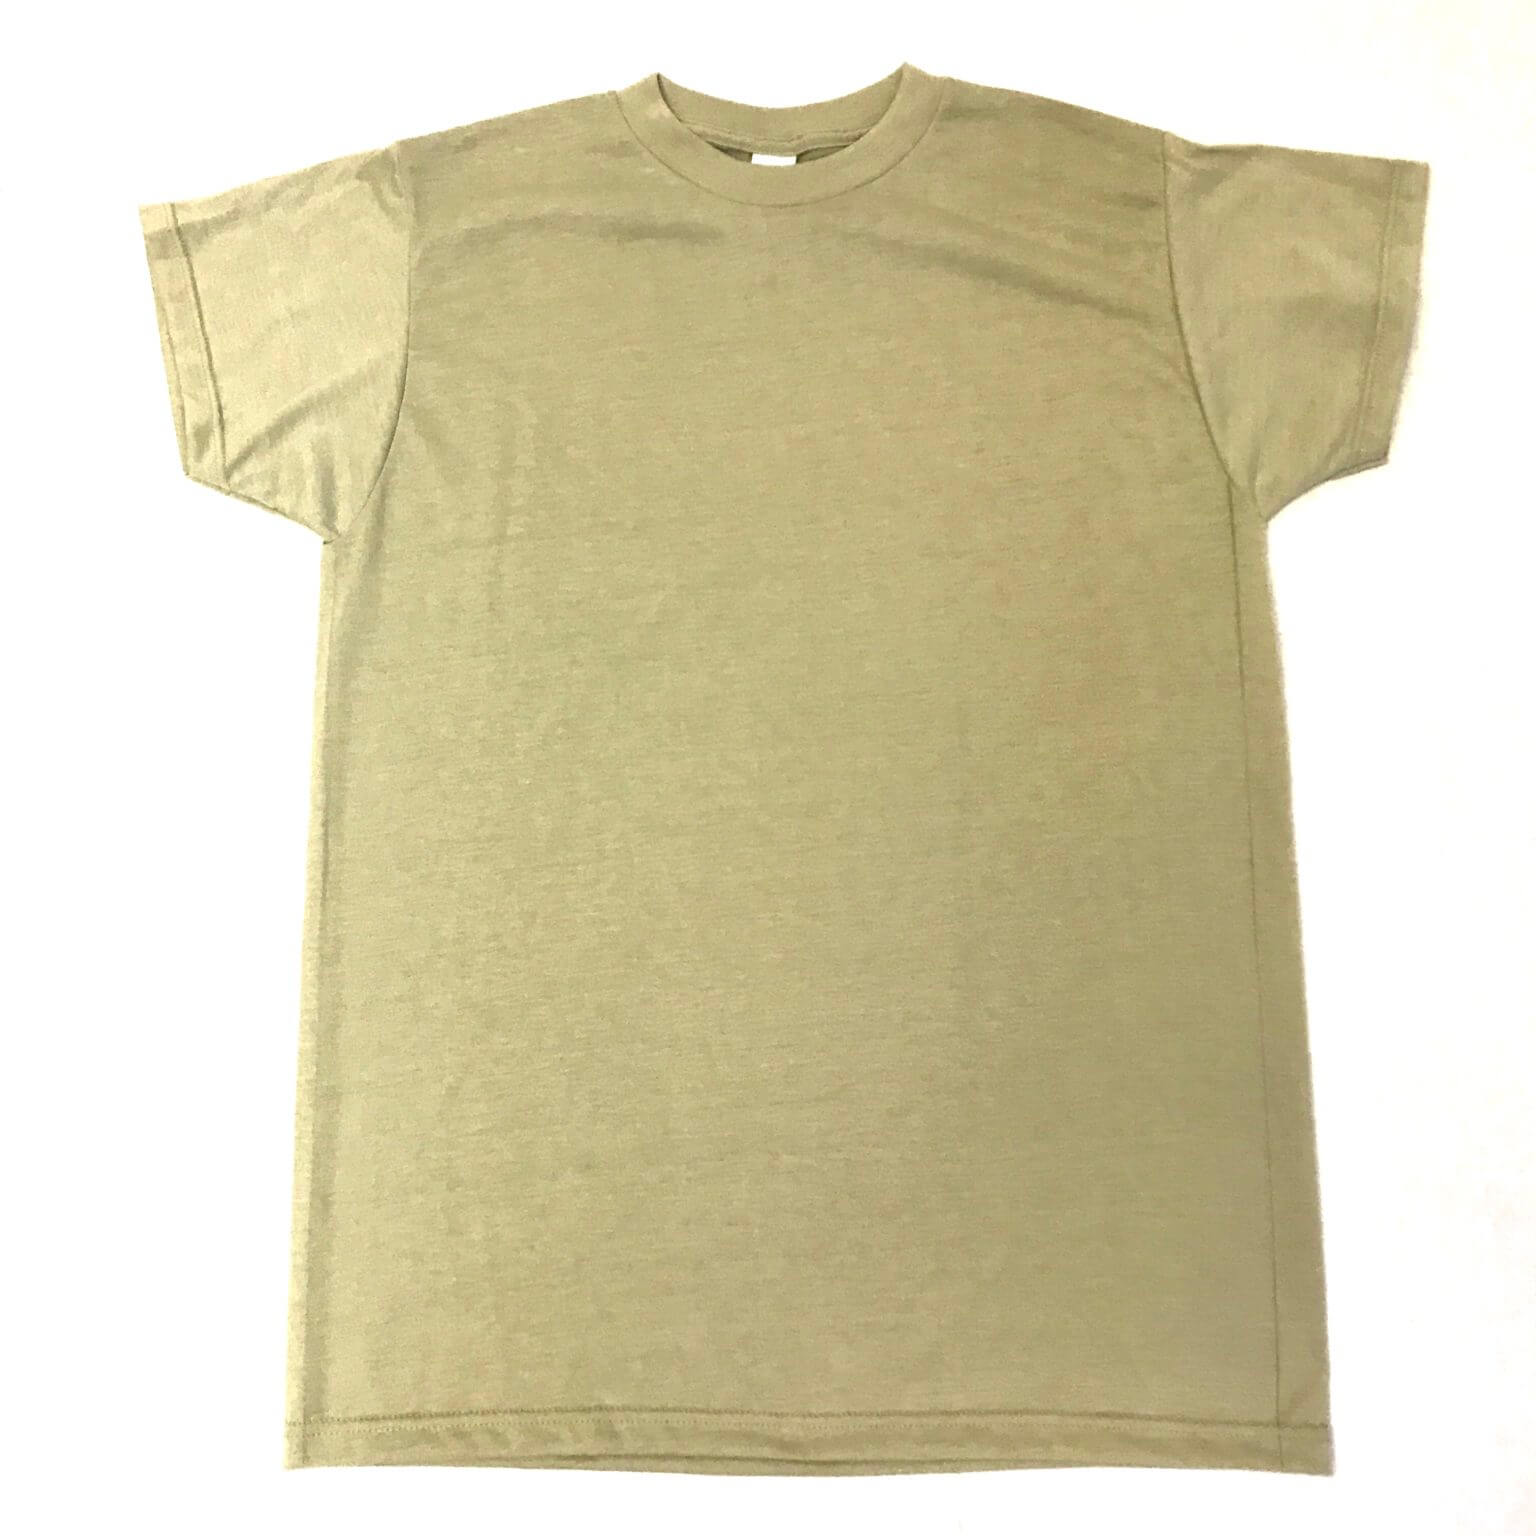 Sand Tan T-Shirts, Polyester Crew Neck Shirt 3 Pack [Genuine Army Issue]